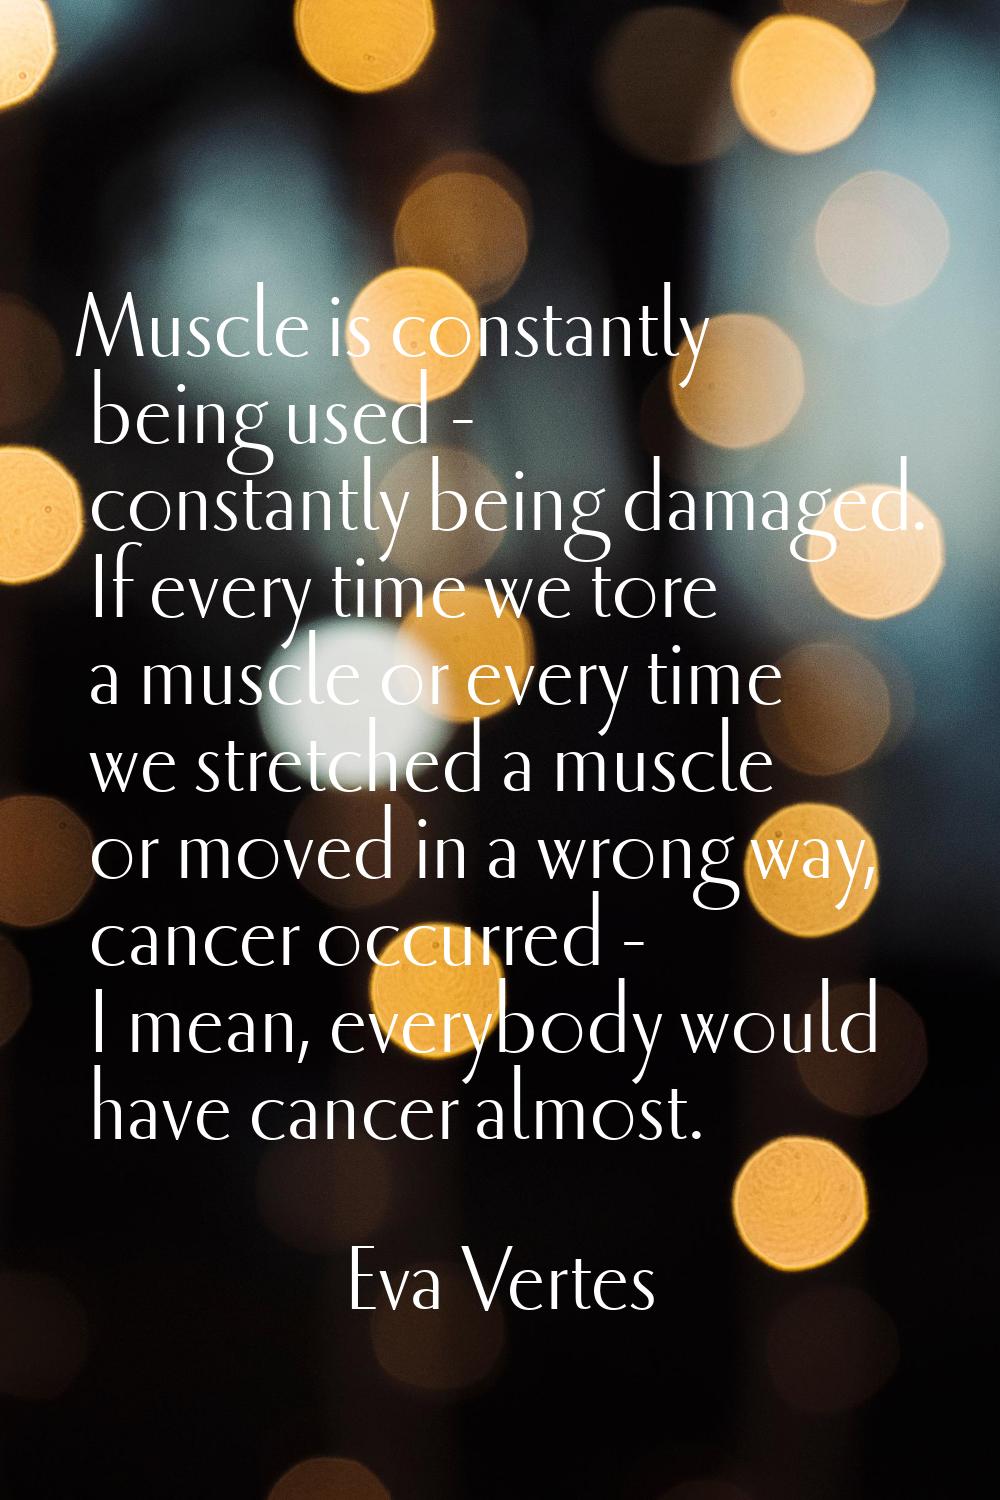 Muscle is constantly being used - constantly being damaged. If every time we tore a muscle or every